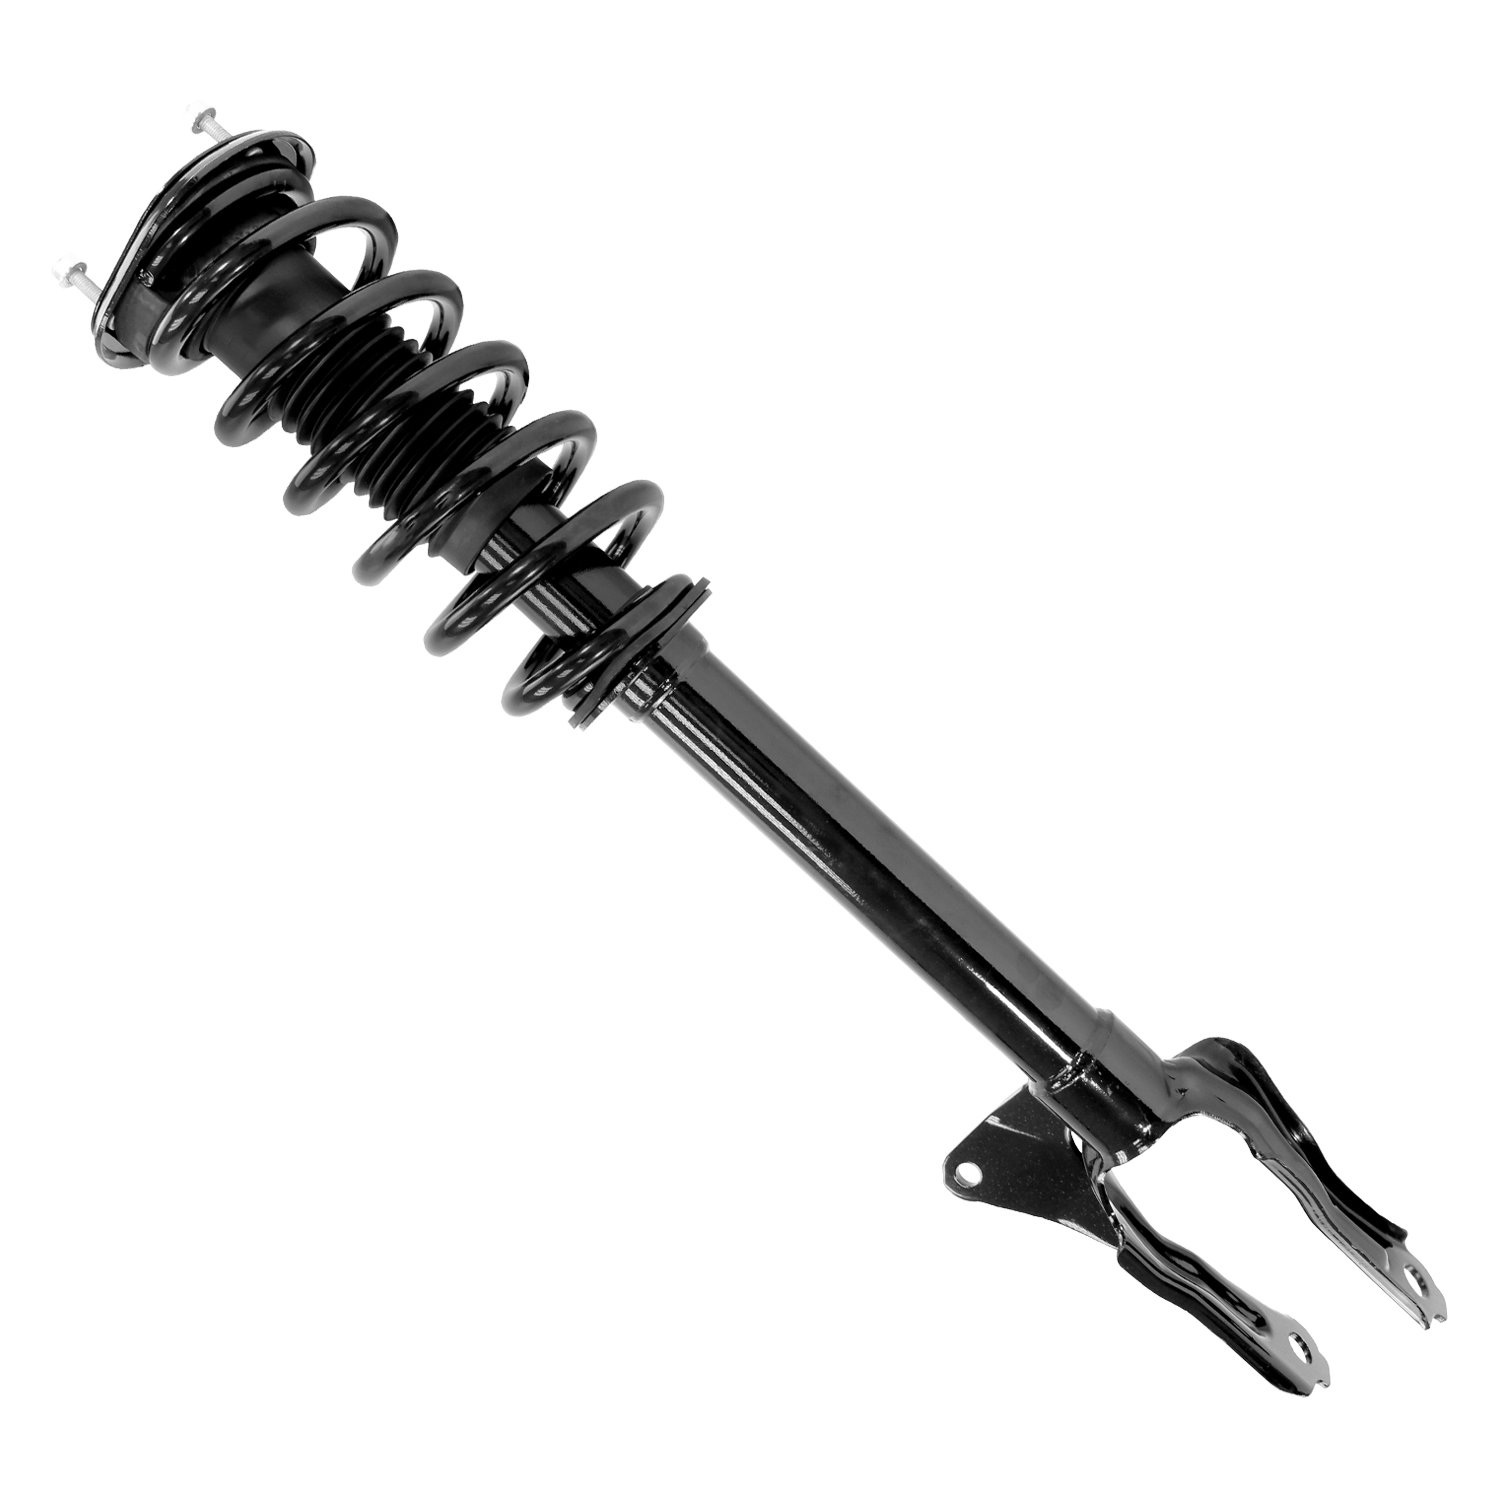 13501 Front Suspension Strut & Coil Spring Assemby Fits Select Dodge Durango